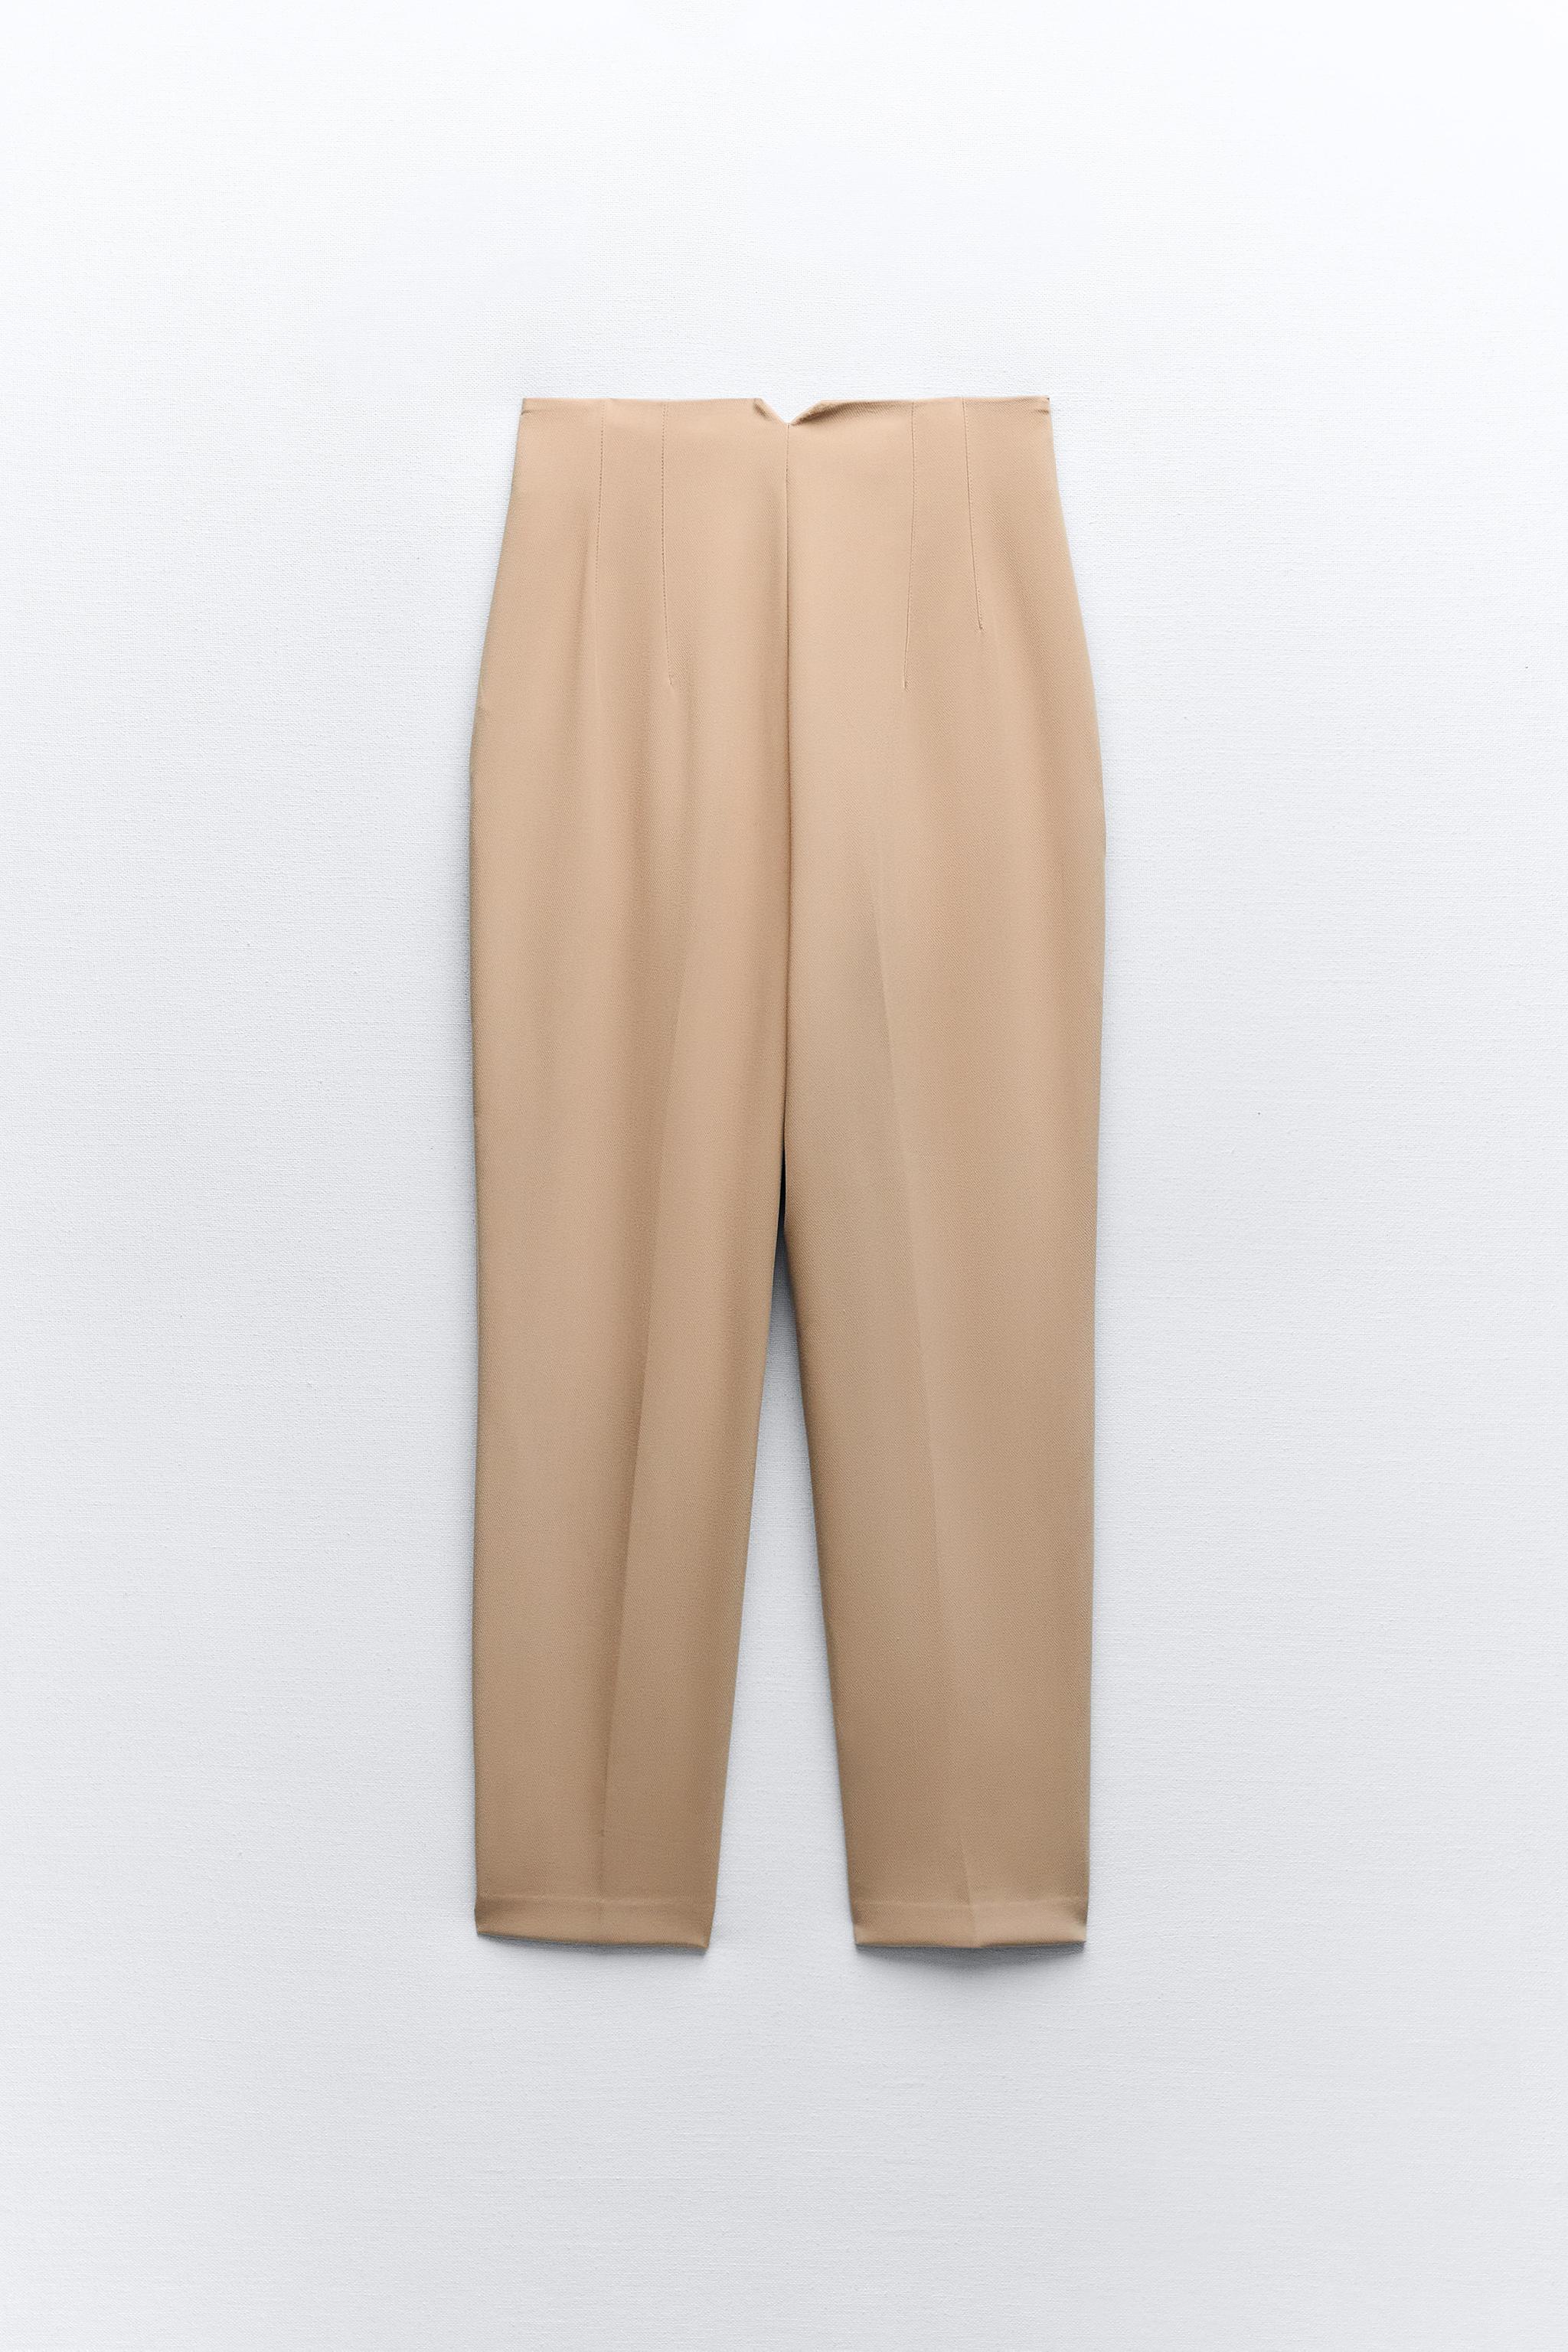 Zara HIGH WAISTED PANTS WITH FABRIC COVERED BELT size S Ref. 4387/140